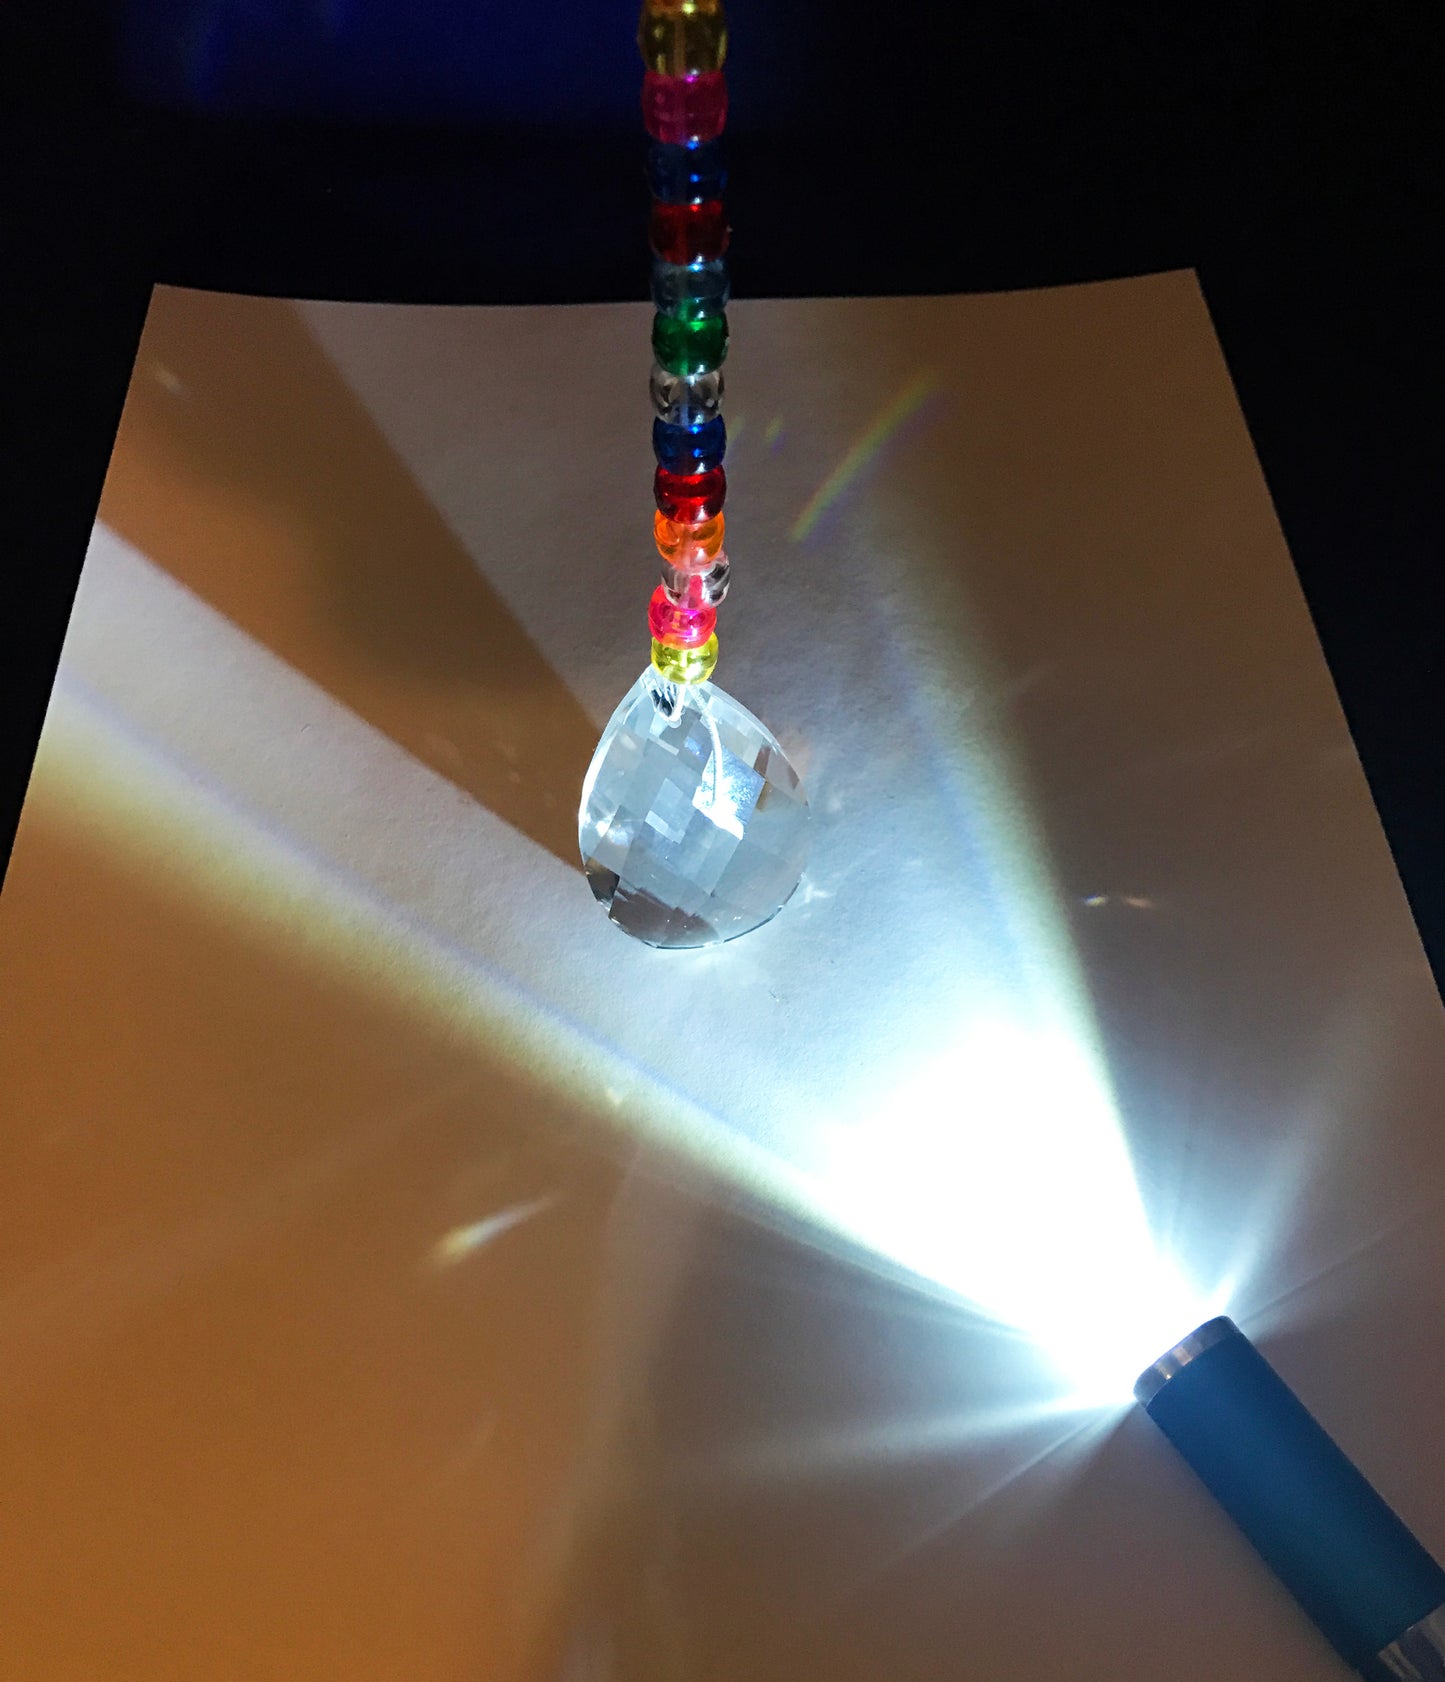 Making rainbows with a prism